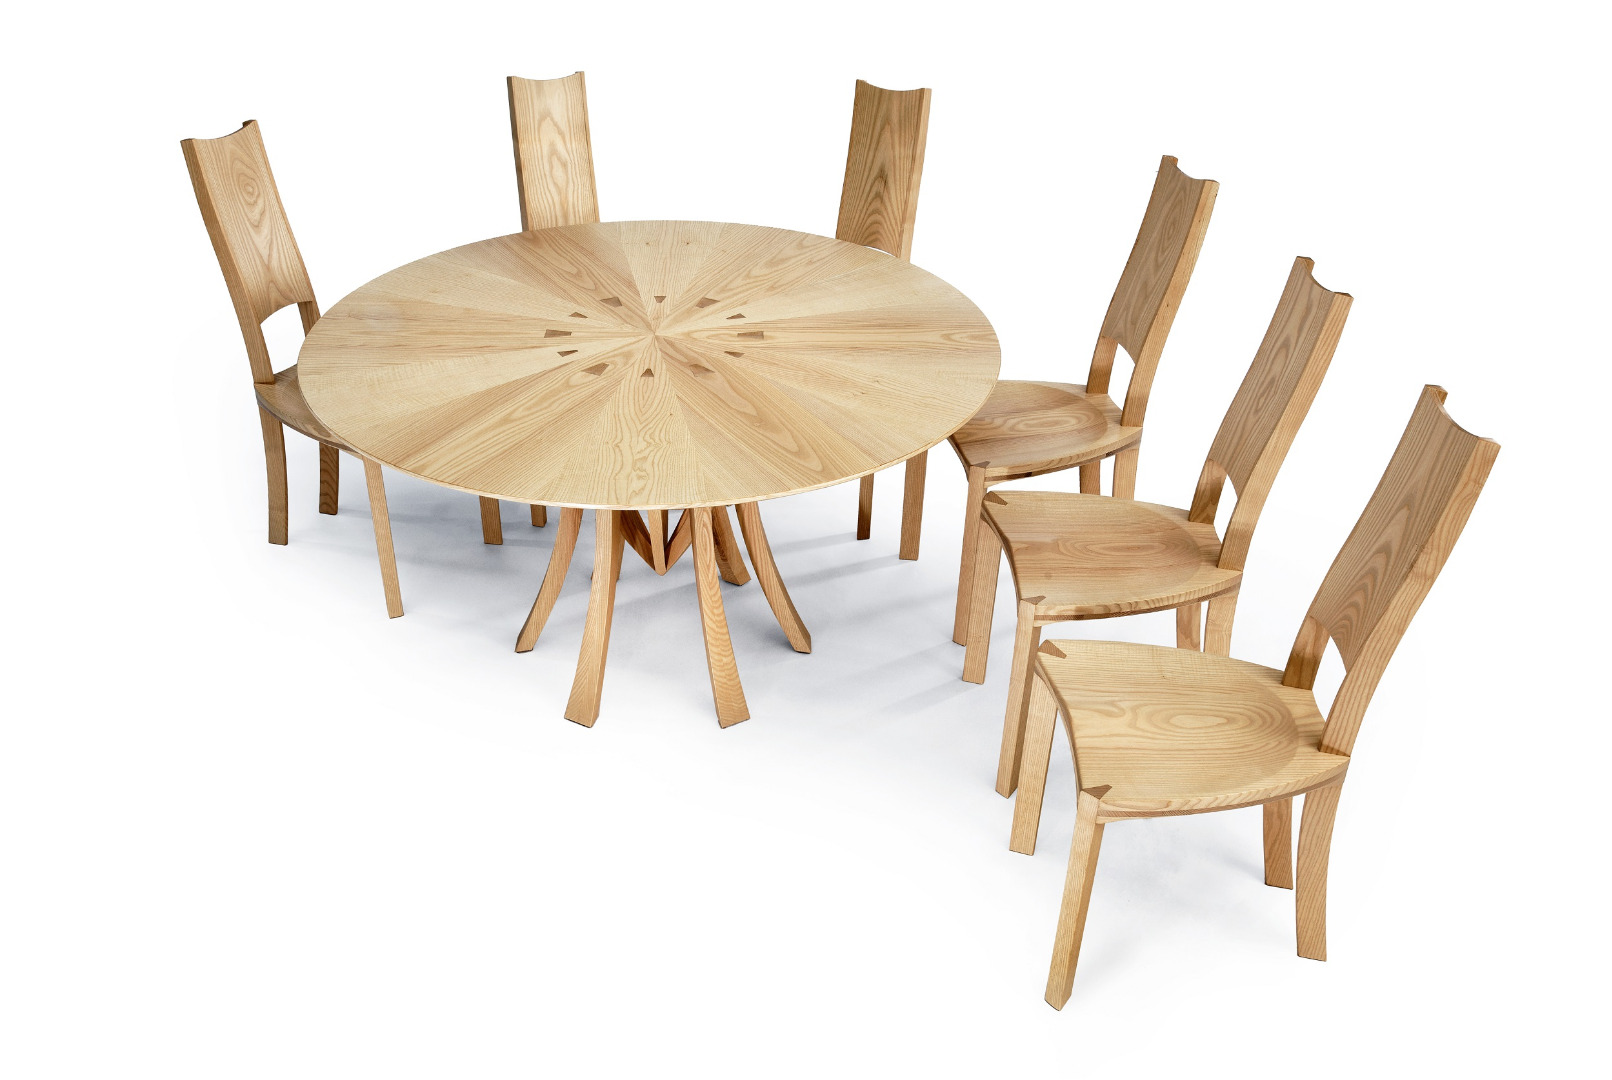 Daniel_Lacey D&F - circular ash dining table with Blagr chairs - Copy